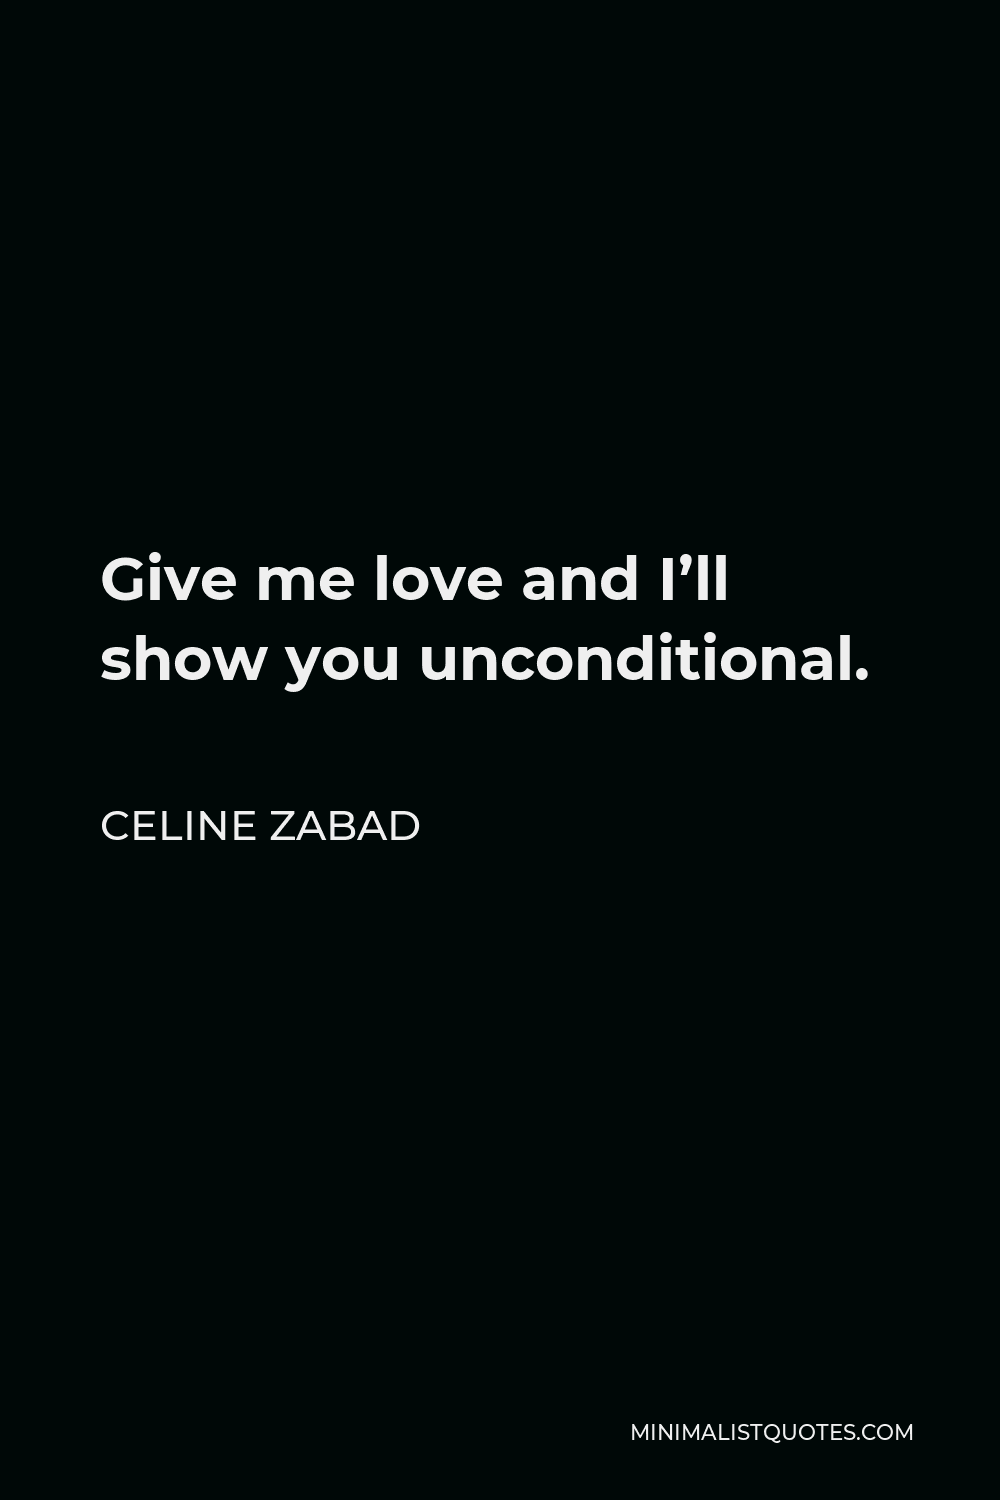 Celine Zabad Quote - Give me love and I’ll show you unconditional.